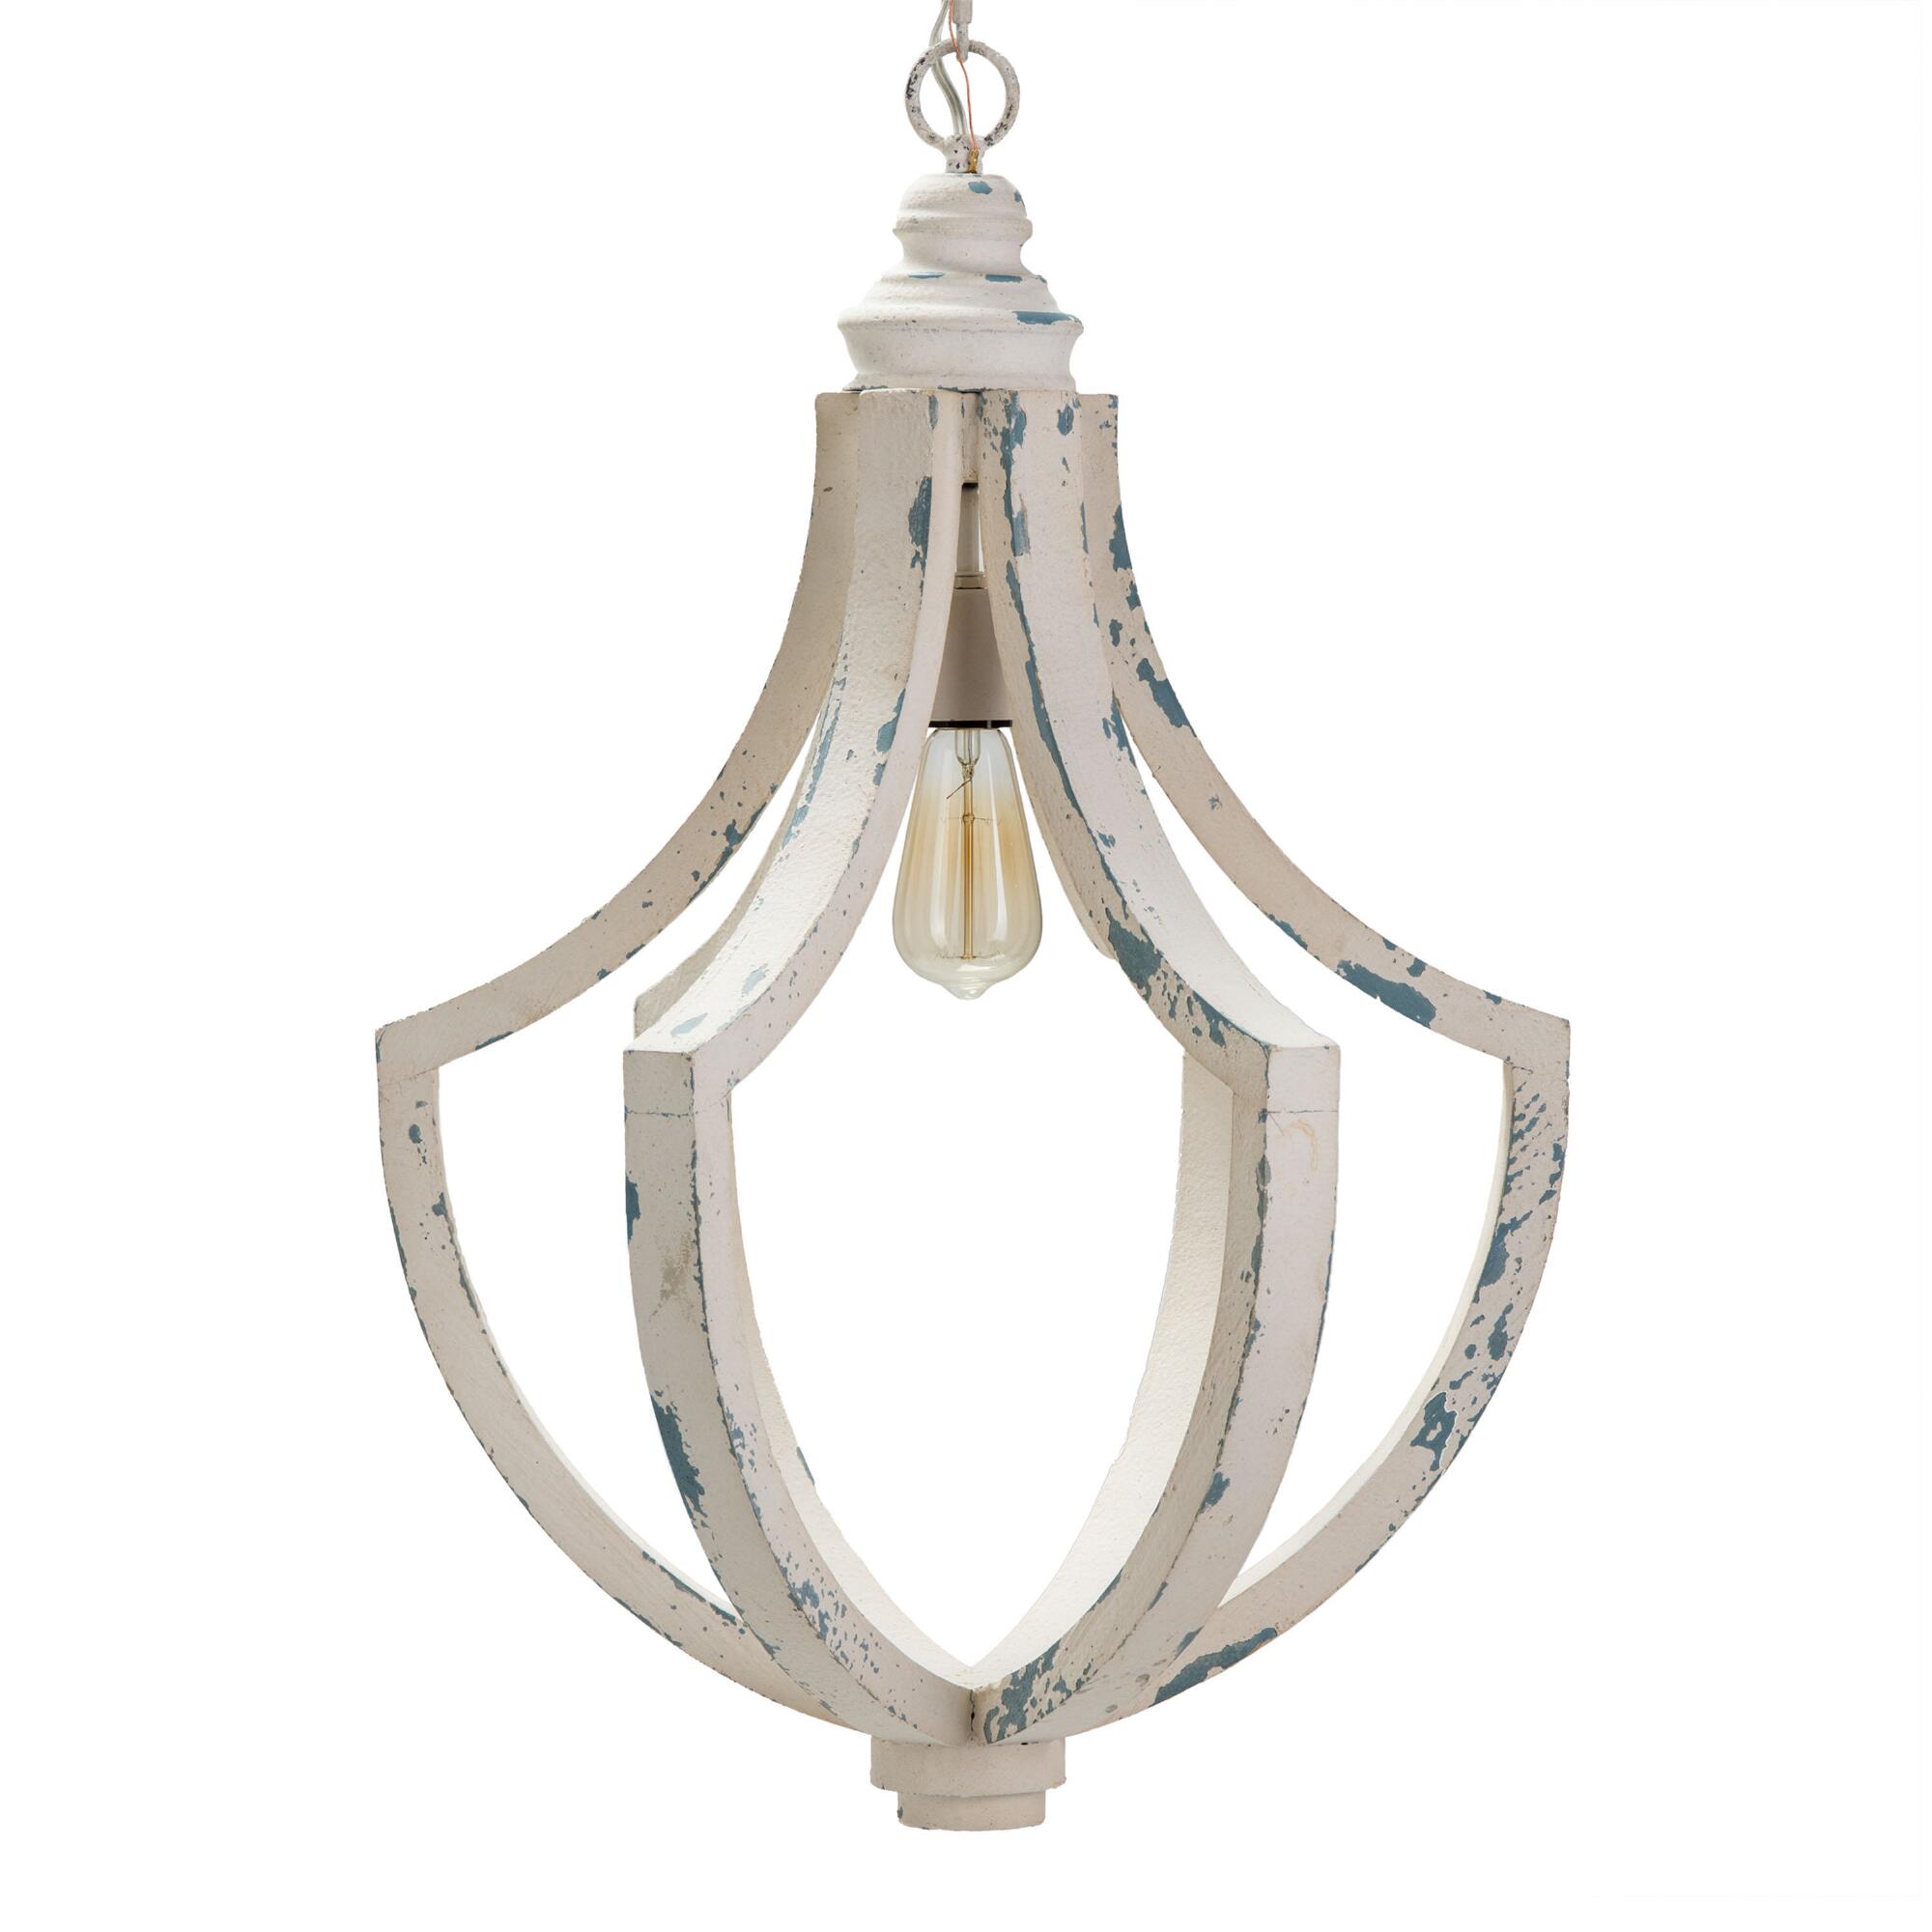 Distressed White Wood Teardrop Shelby Pendant Lamp: Gray by World Market